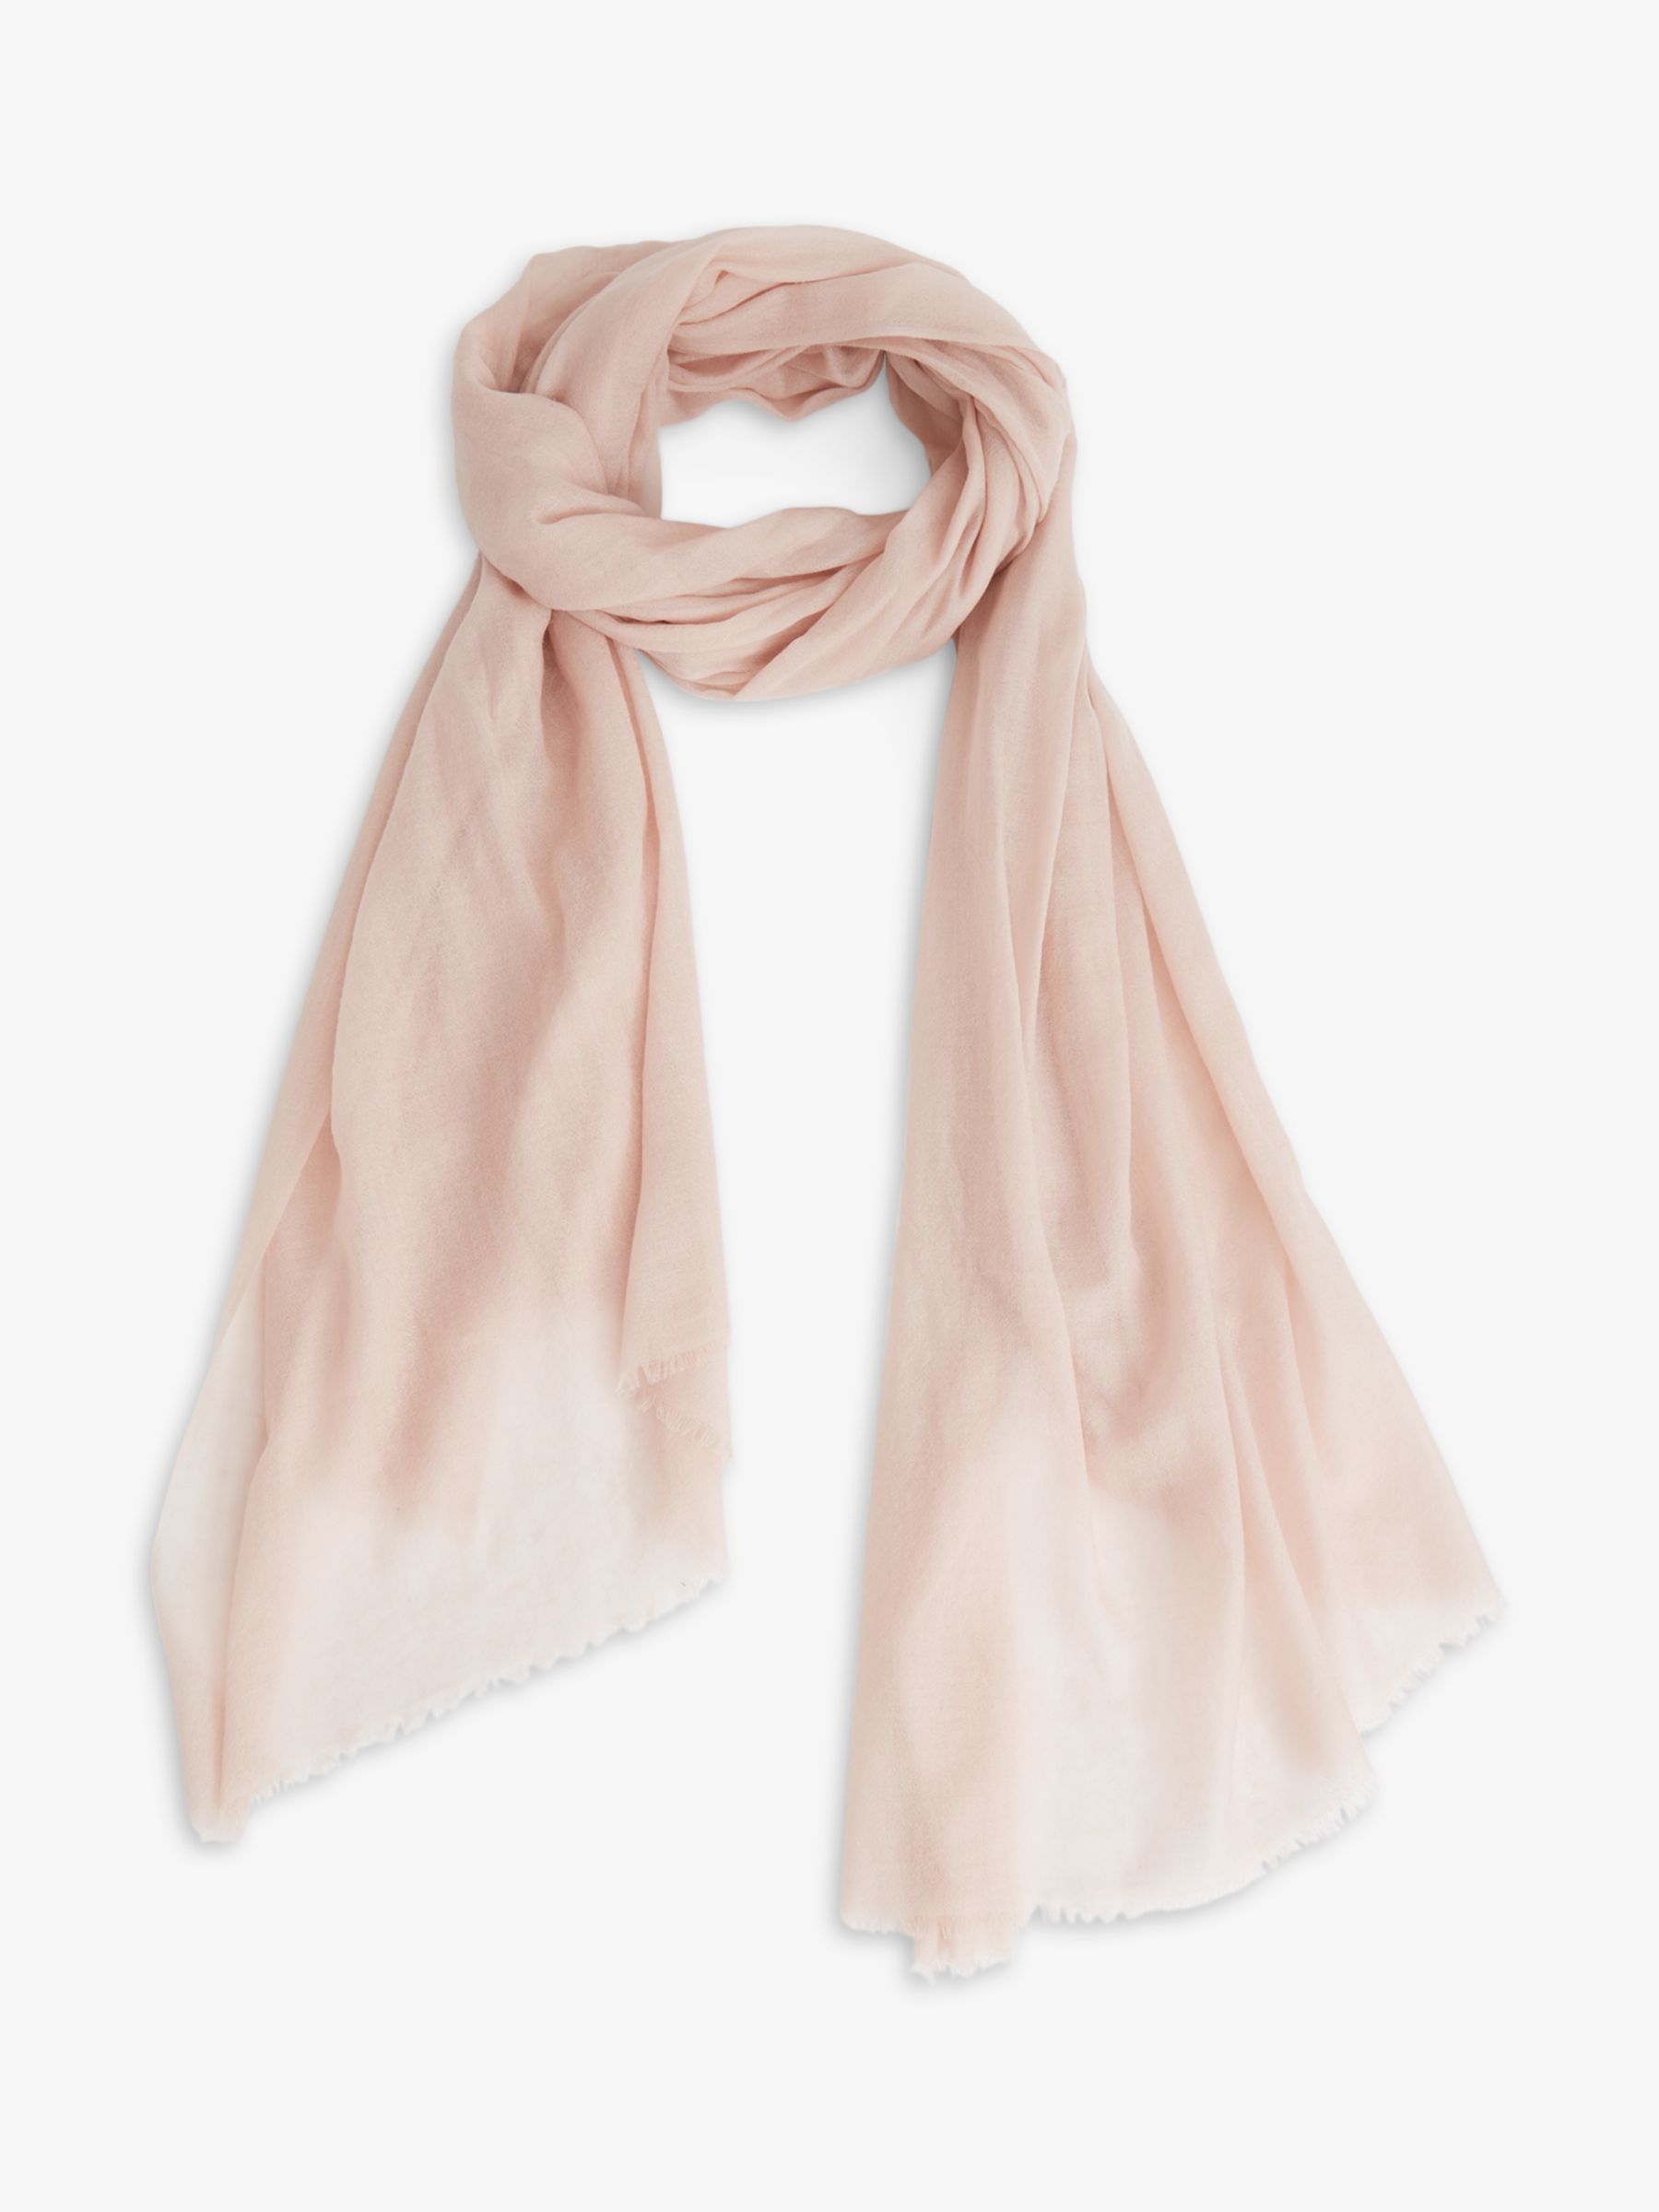 Reiss Heidi Wool and Cashmere Scarf, Blush at John Lewis & Partners